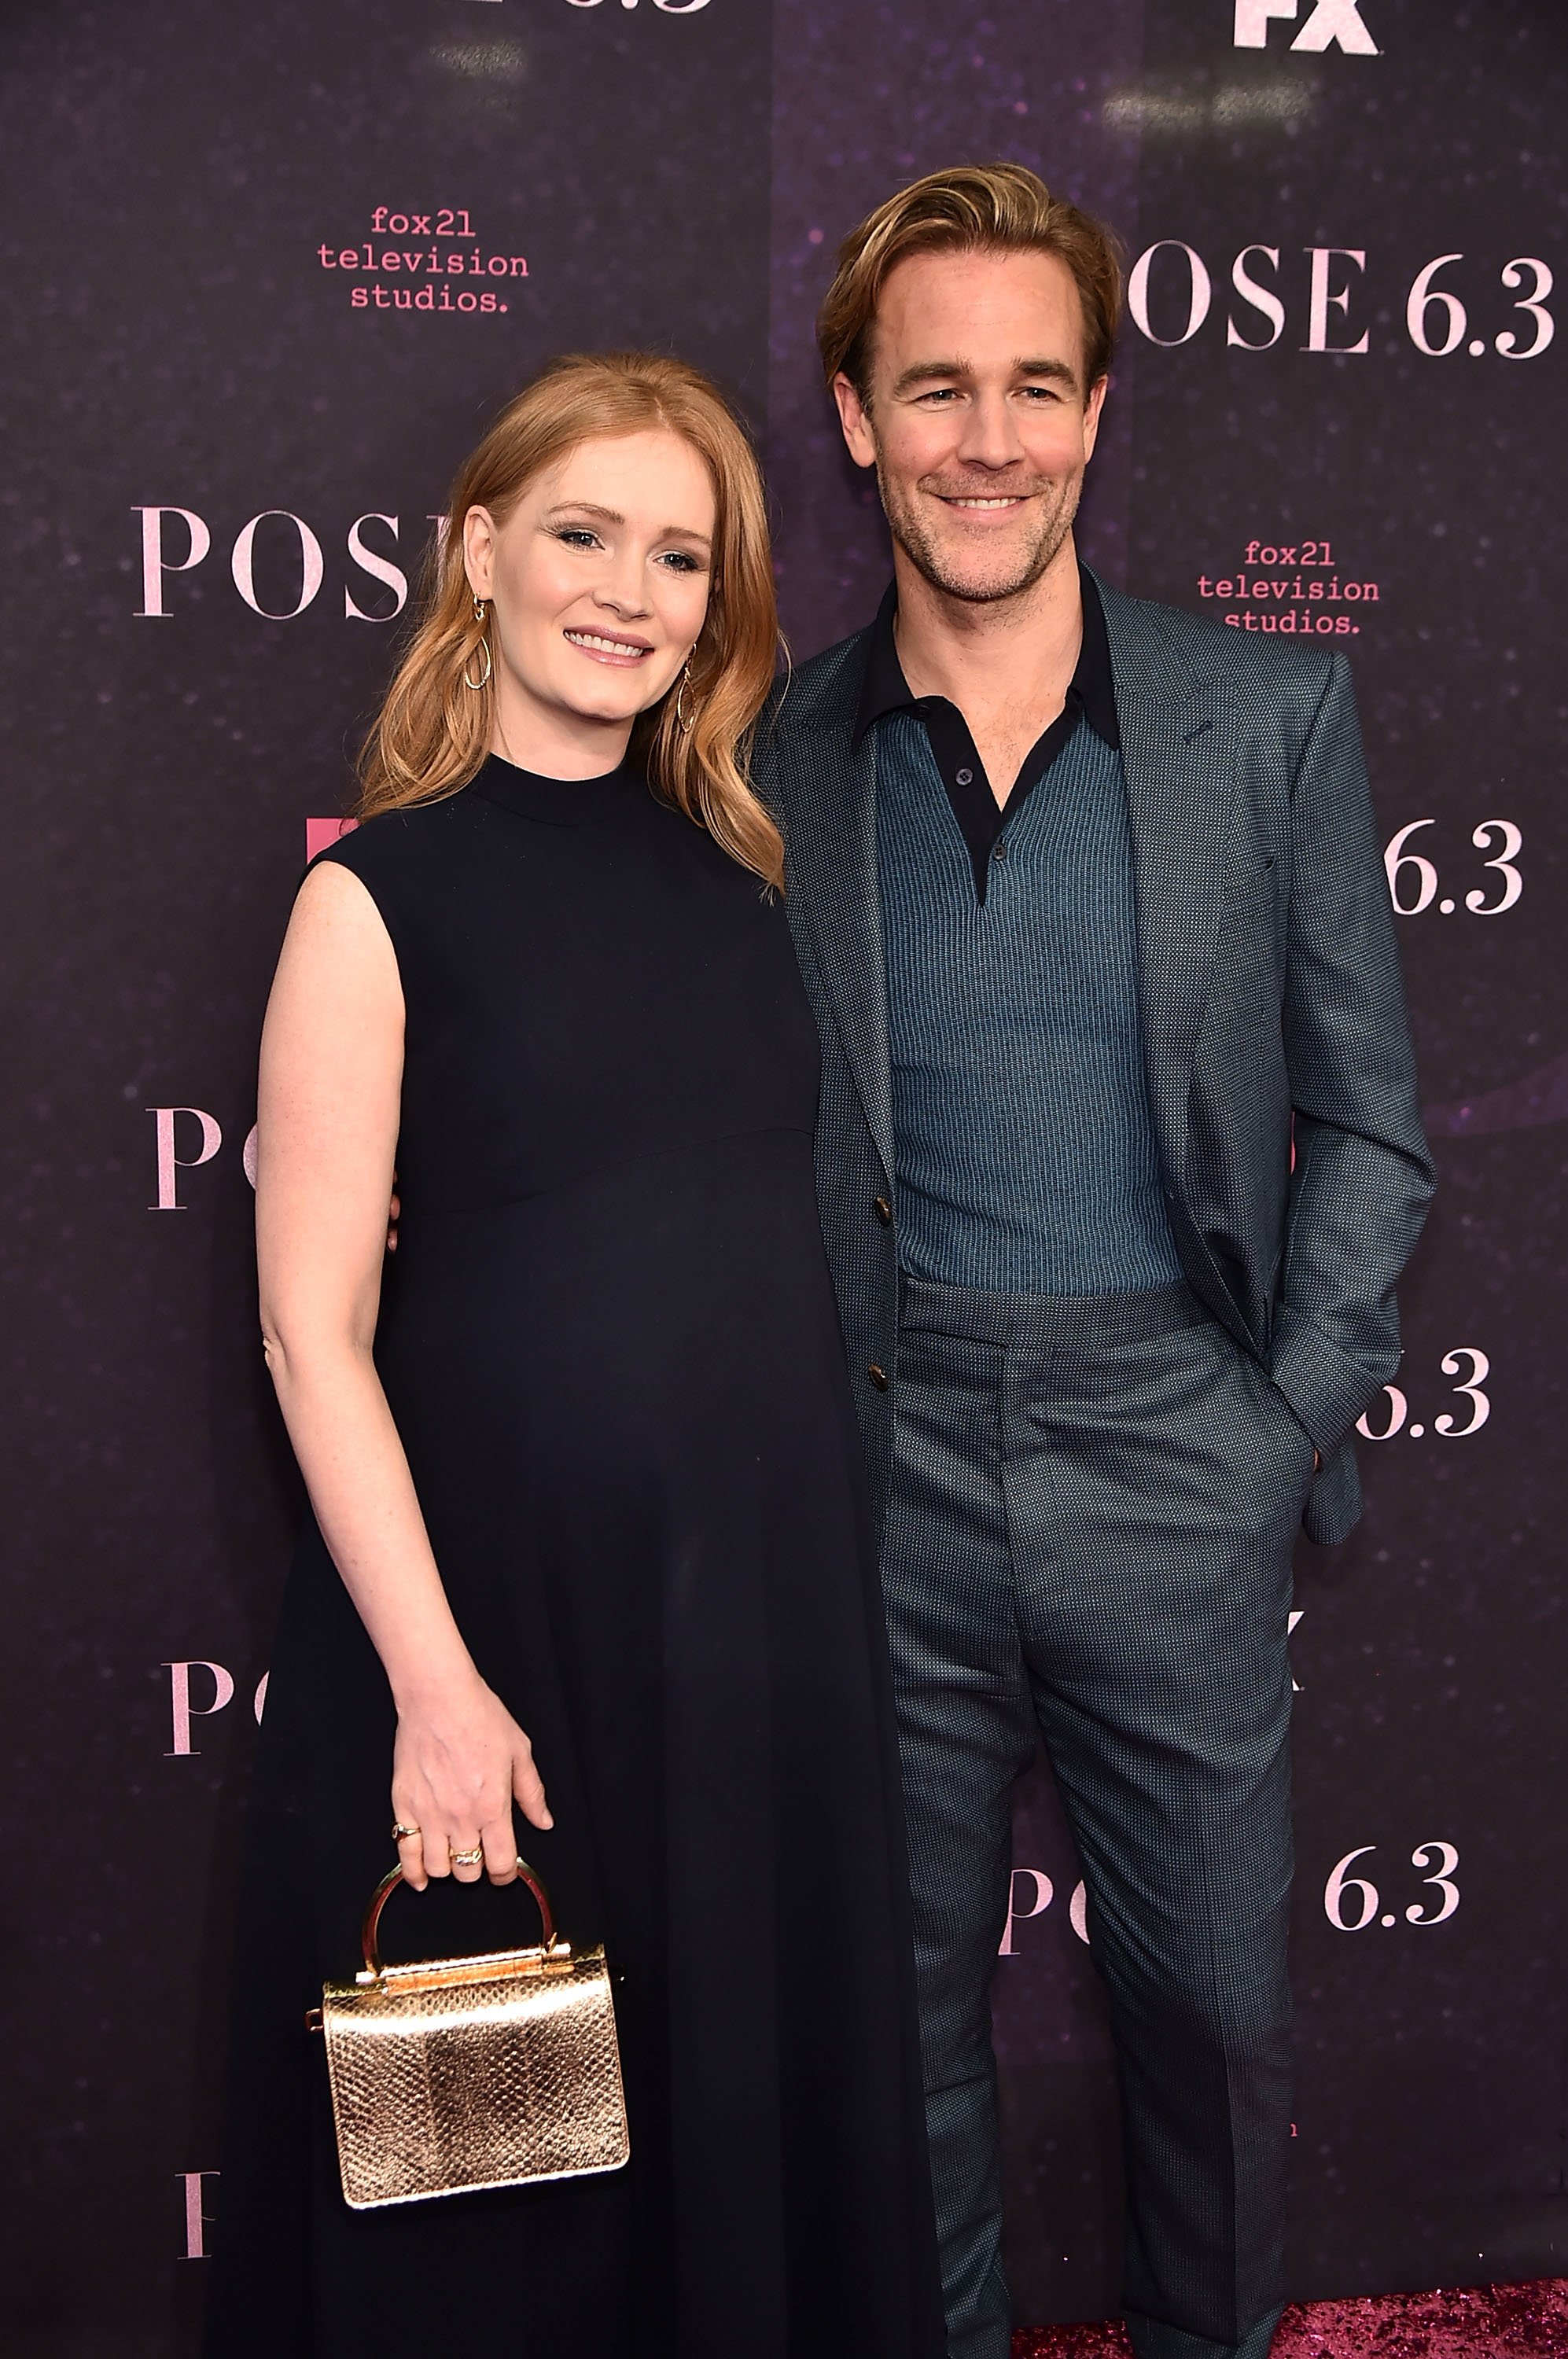 Kimberly Brook and James Van Der Beek attending the "Pose" New York Premiere at Hammerstein Ballroom in New York City | Source: Getty Images